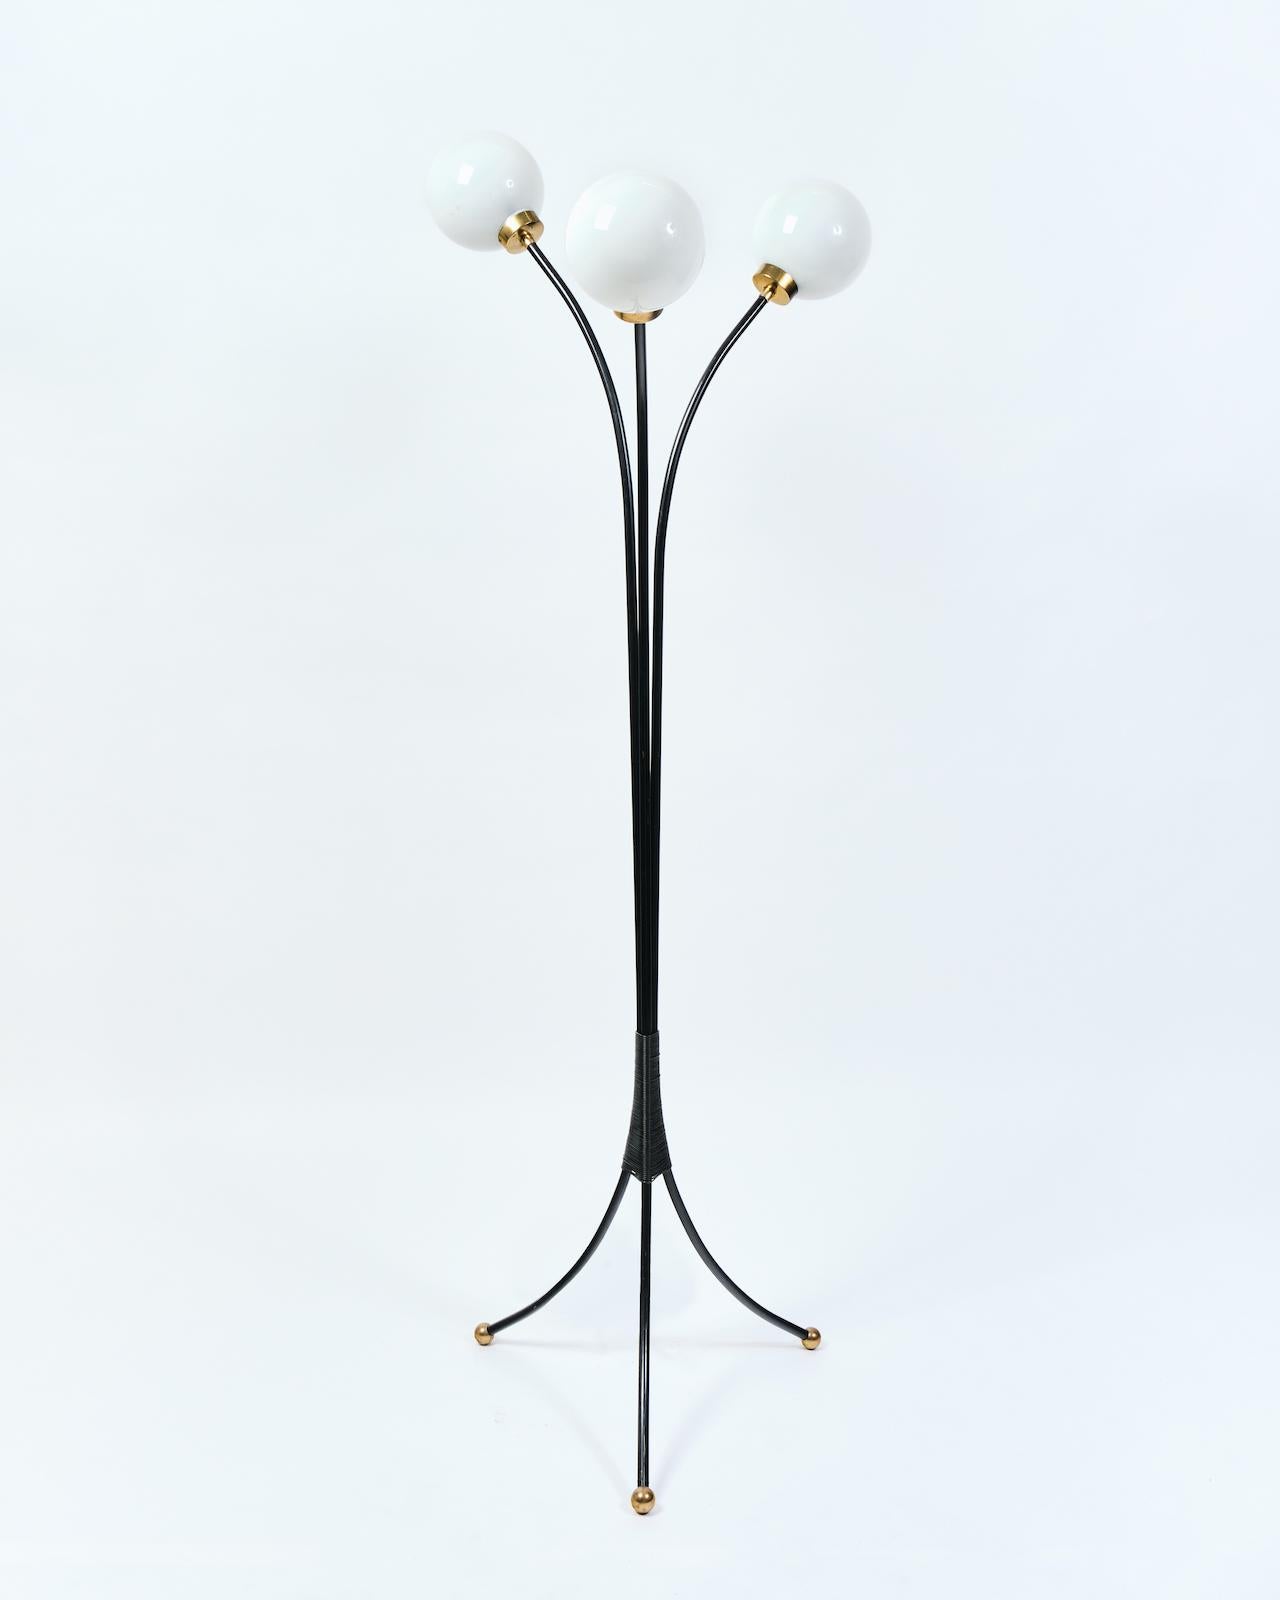 Italian Mid-Century Modern design floor light with three spherical lamps in opaline glass and brass.

Dimensions: H143 x D52 cm.